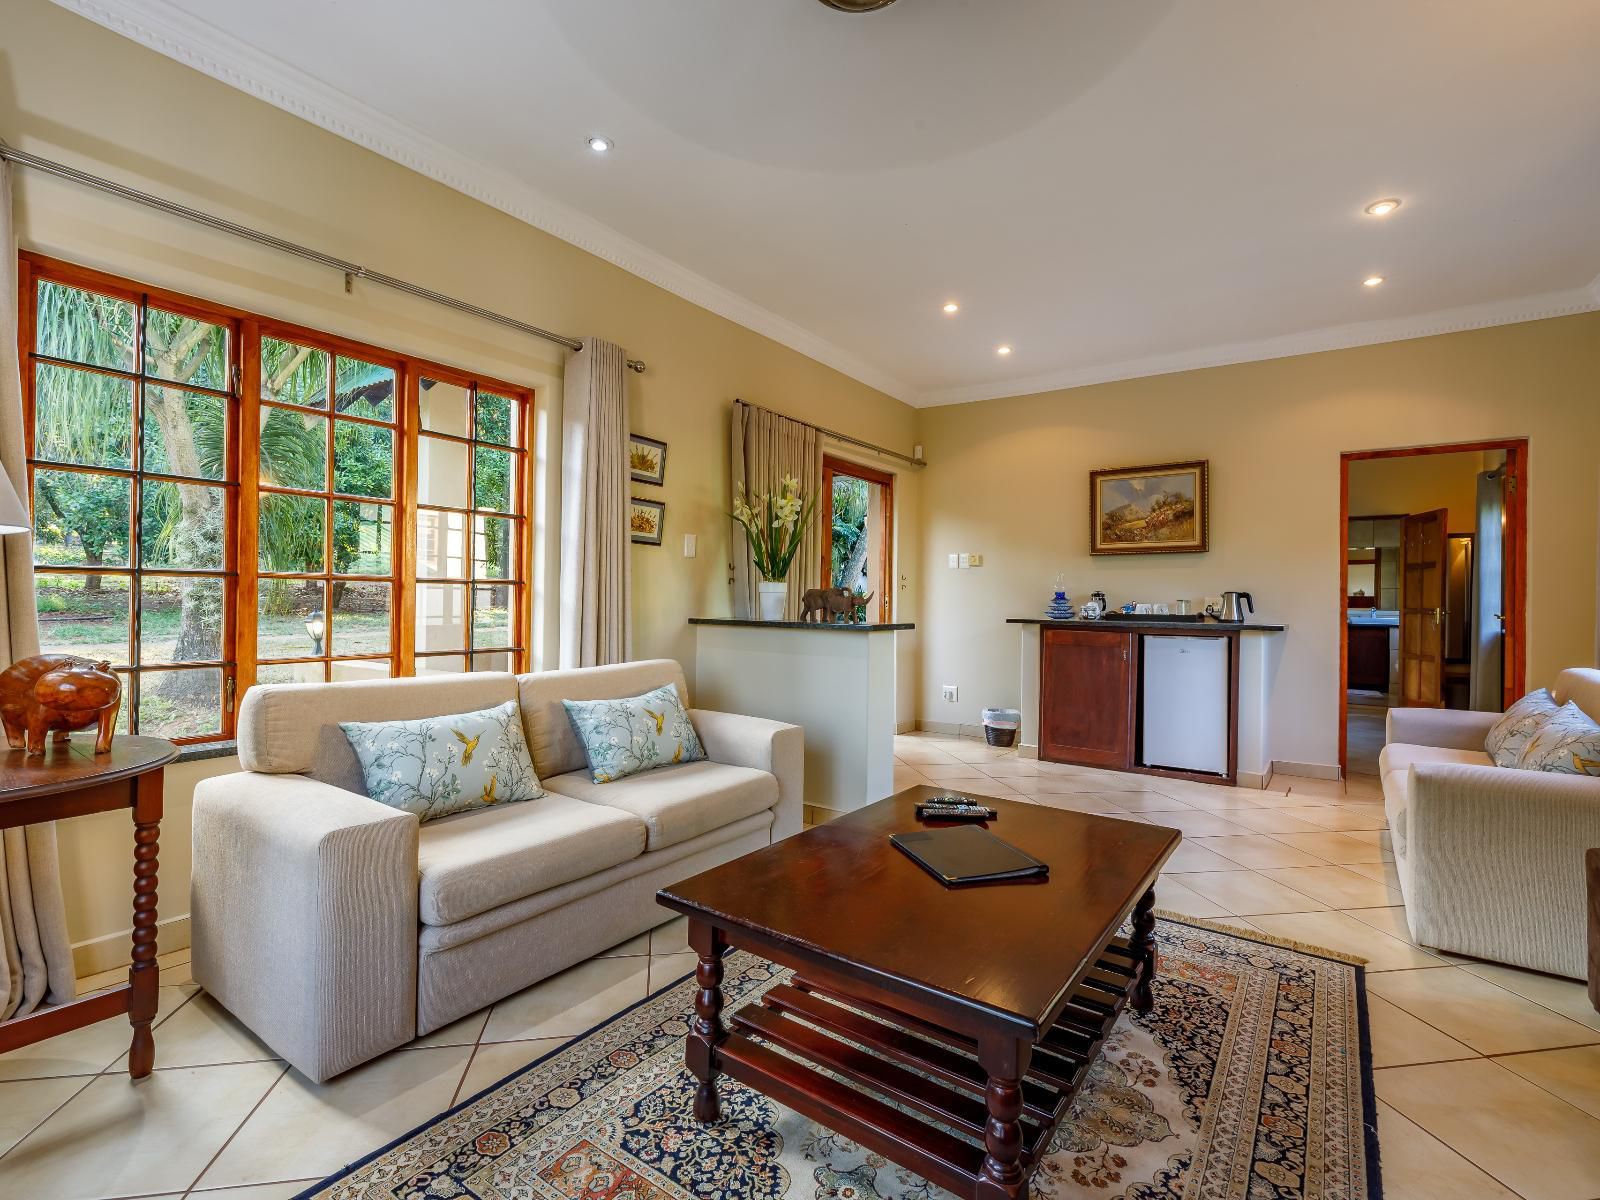 Country Lane Lodge White River Mpumalanga South Africa House, Building, Architecture, Living Room